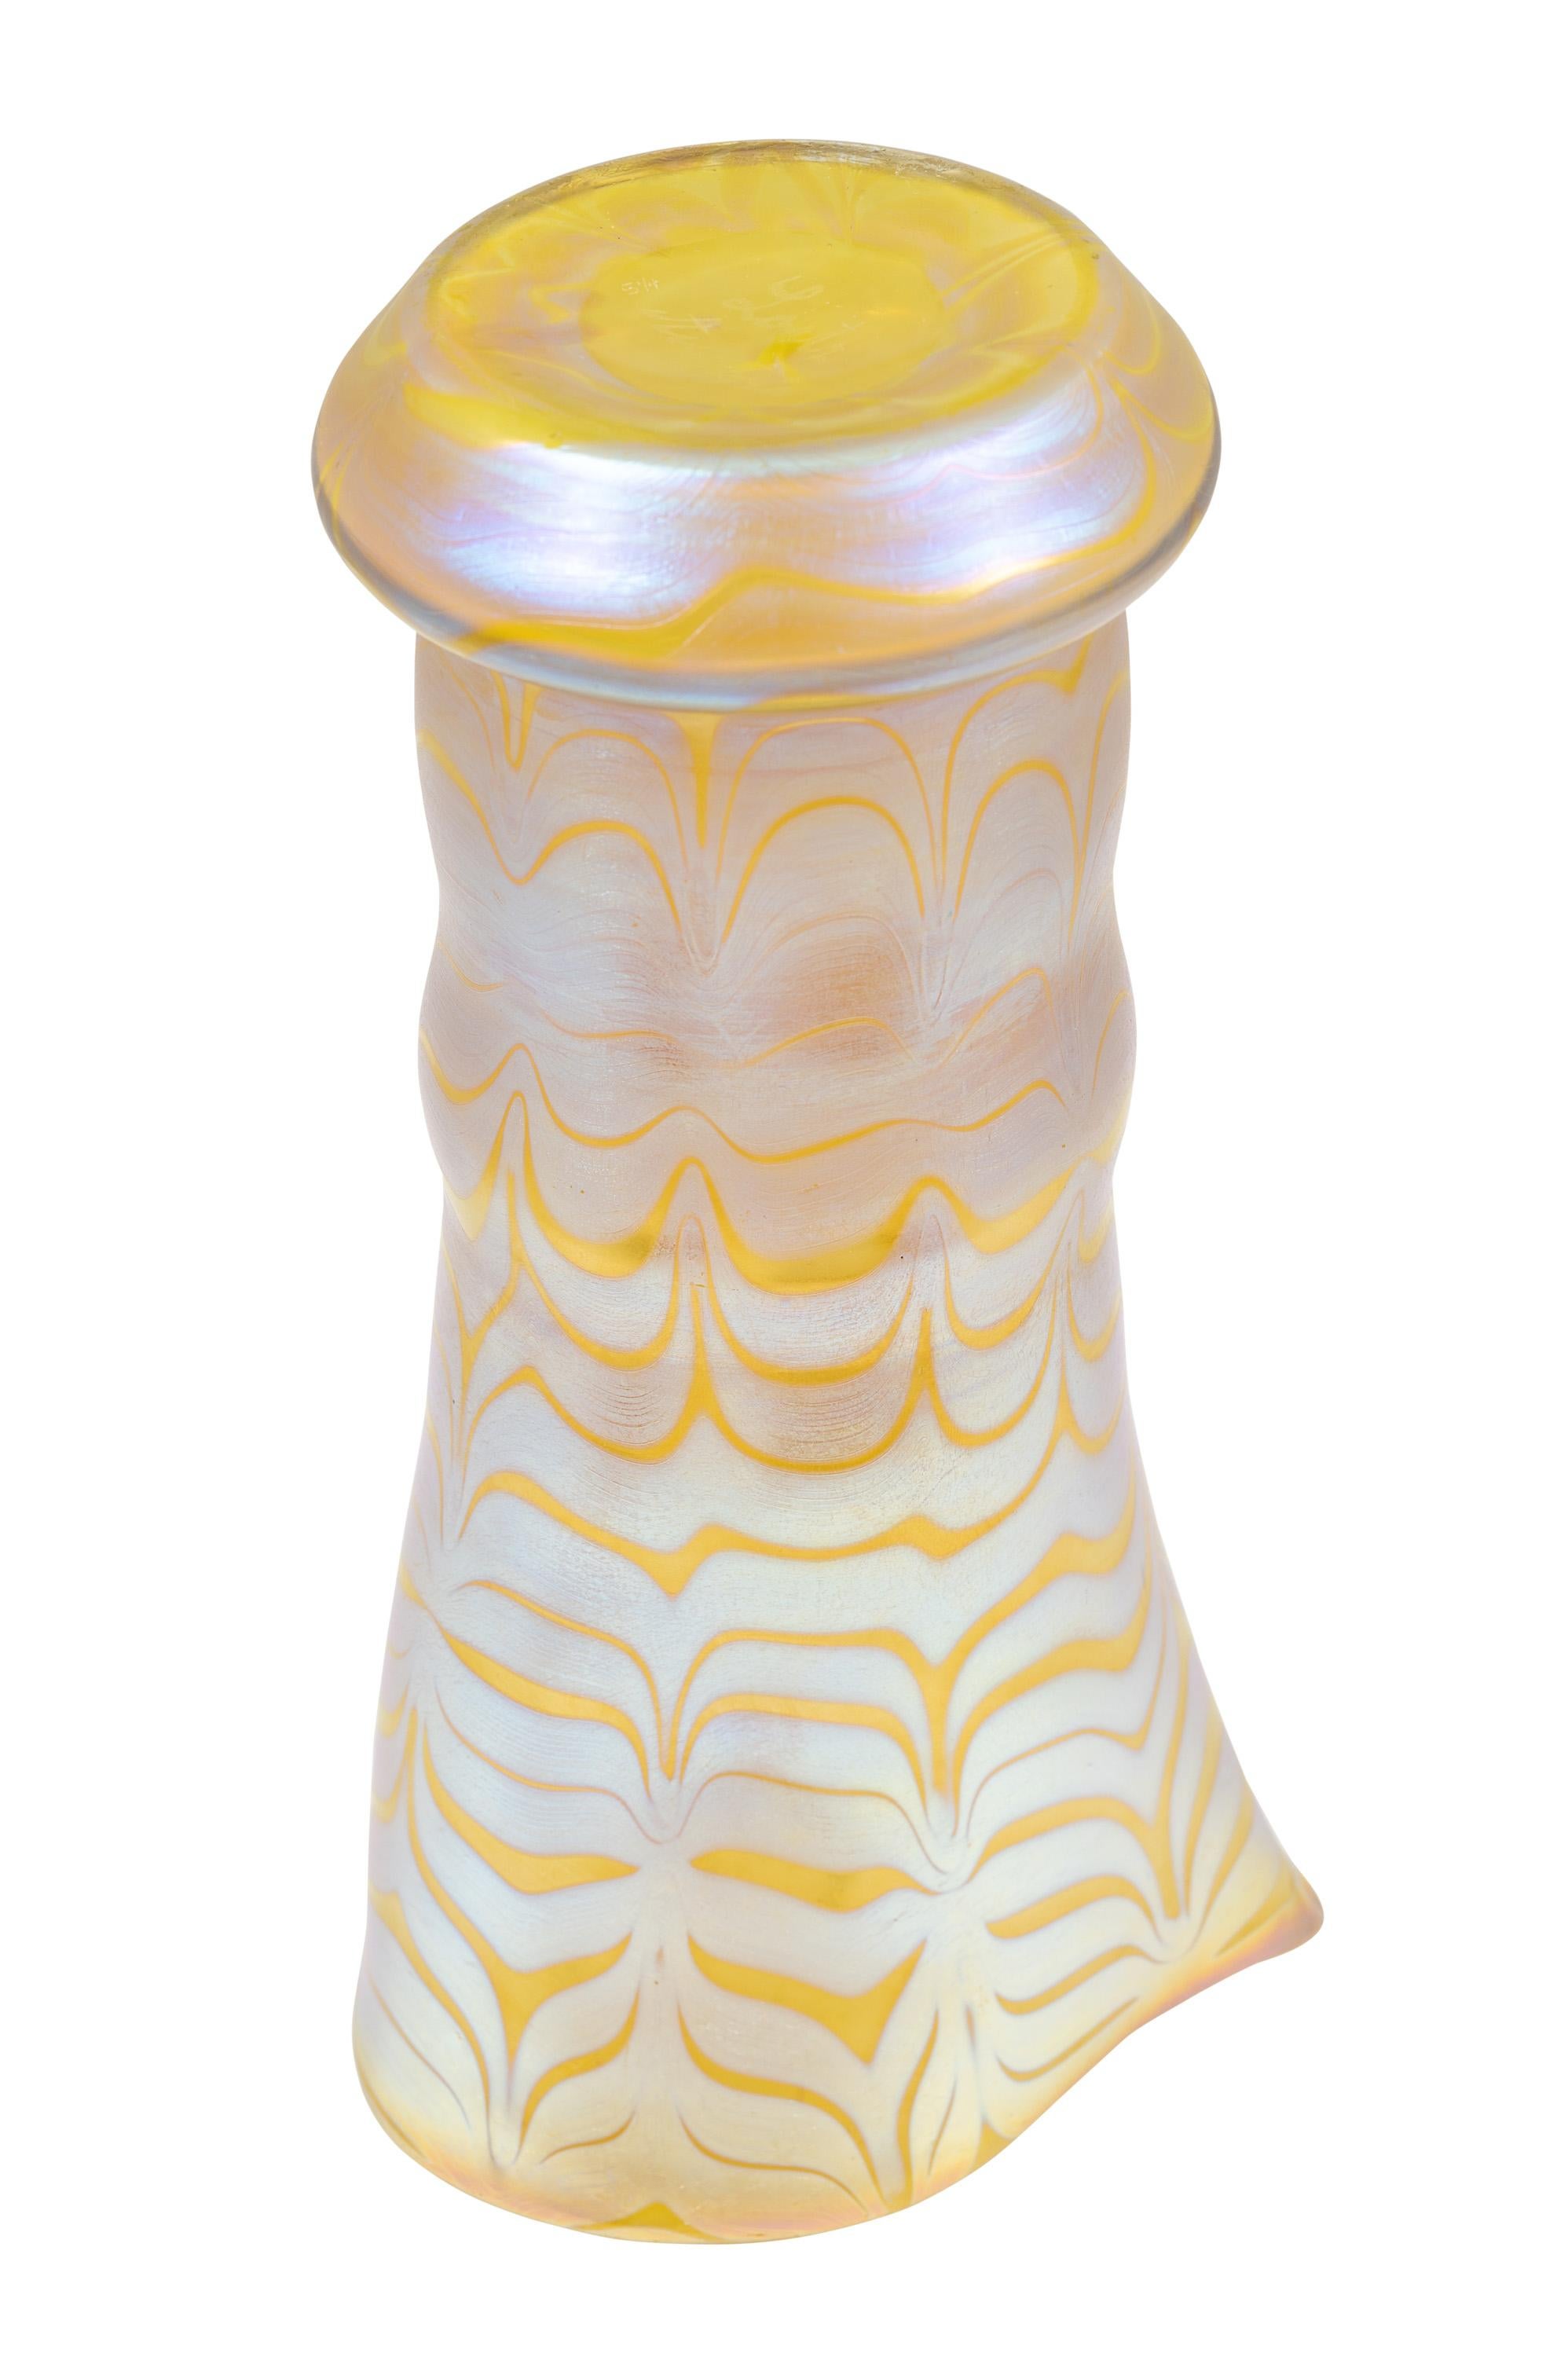 Bohemian Glass Vase Loetz circa 1900 Art Nouveau Jugendstil Yellow Signed In Good Condition For Sale In Klosterneuburg, AT